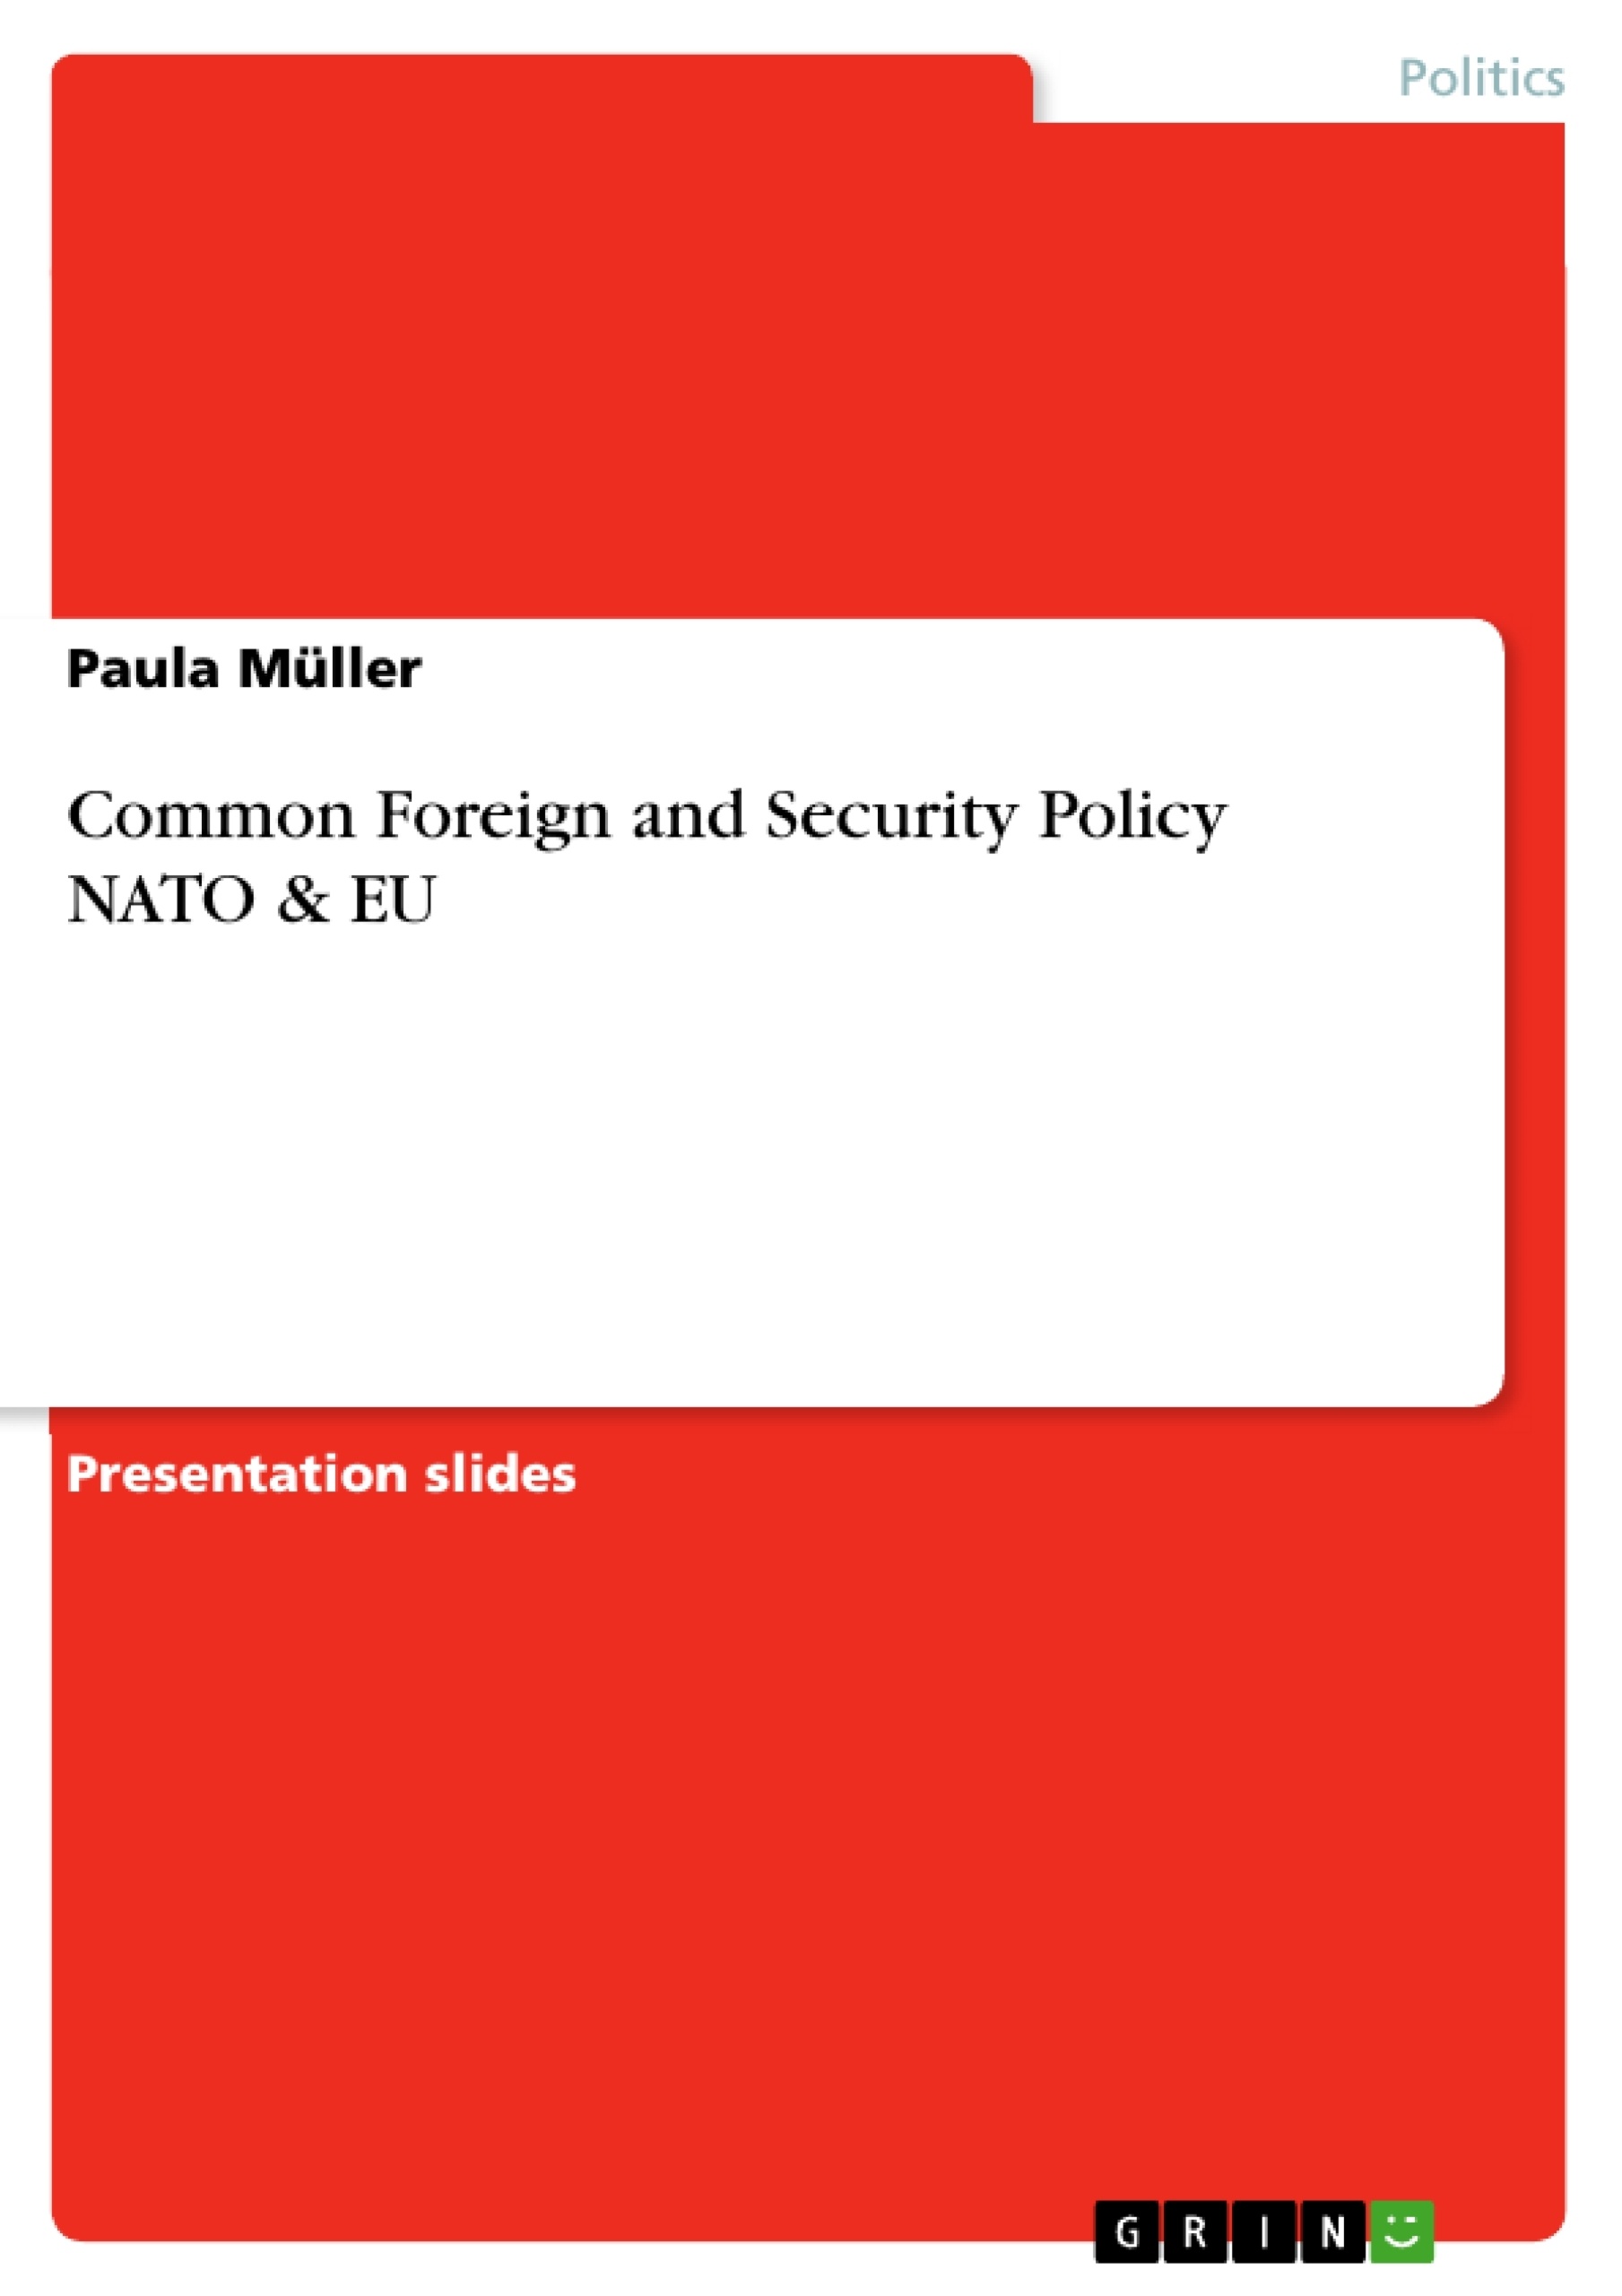 Title: Common Foreign and Security Policy NATO & EU